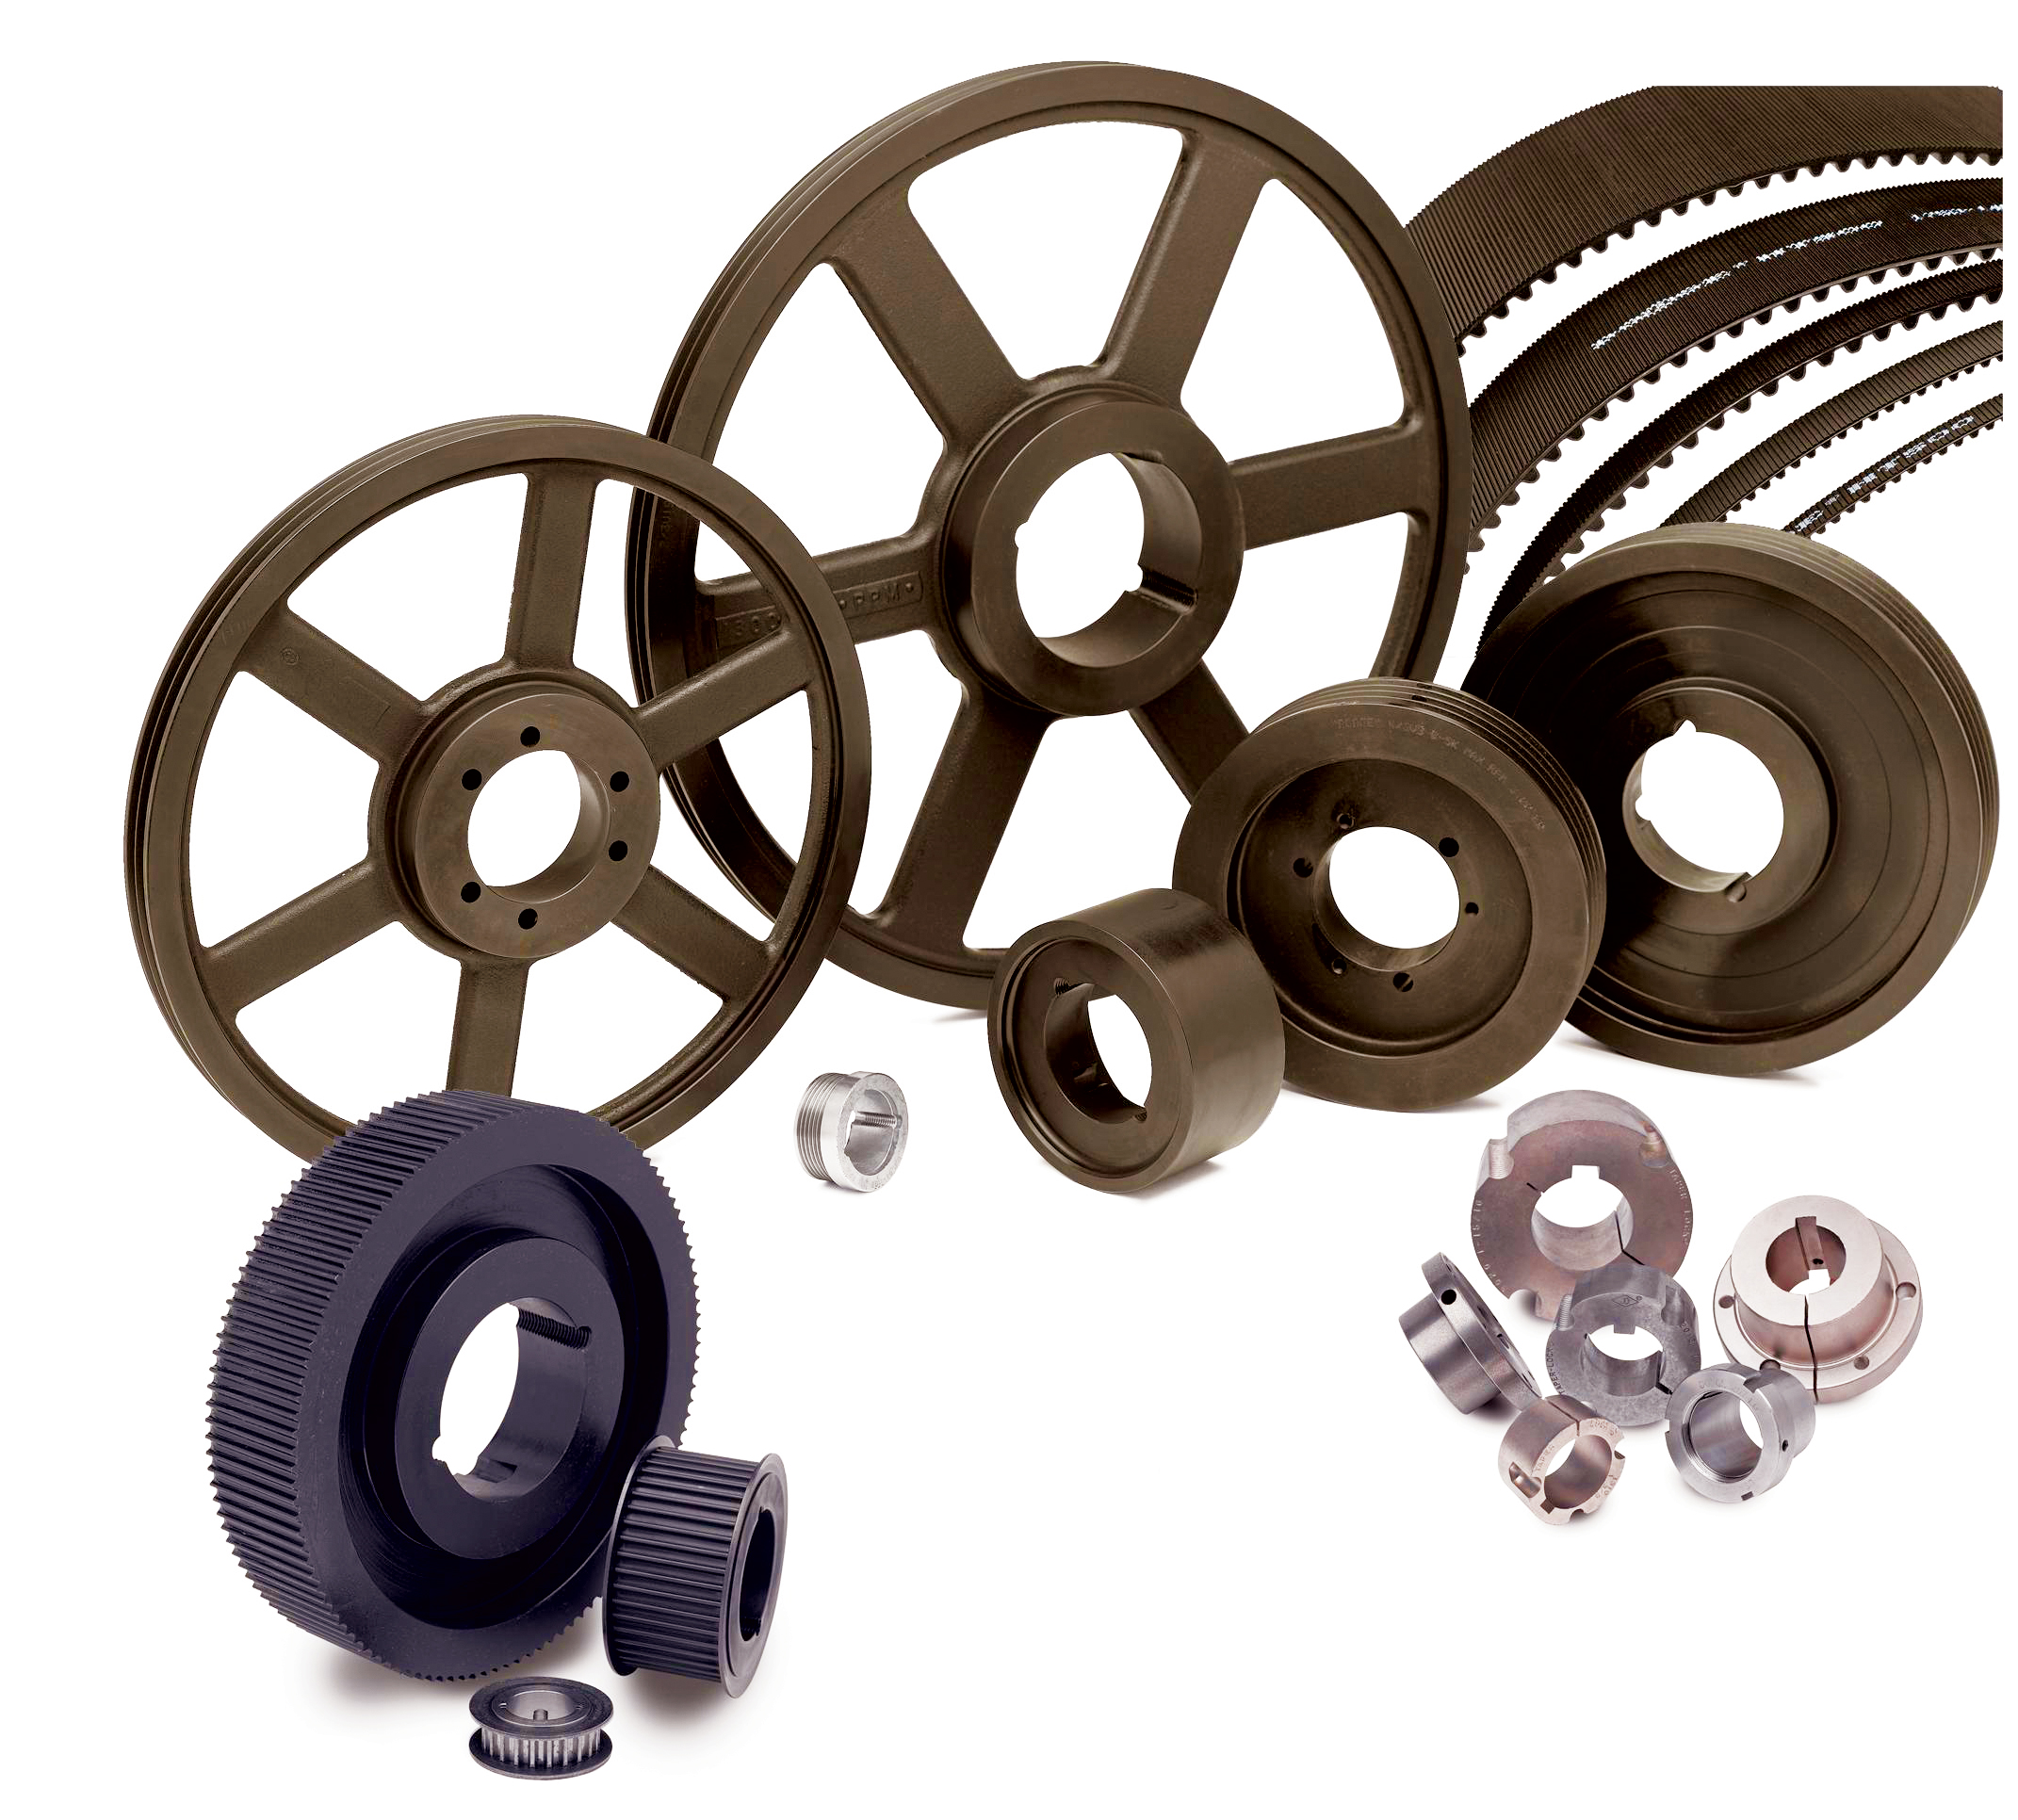 Shown here are Baldor-Maska sheaves for V-belt drives, also called friction drives for the way they operate. Minimum allowable sheave diameter depends on the belt shape and material, whether that’s synthetic, neoprene, urethane or rubber.